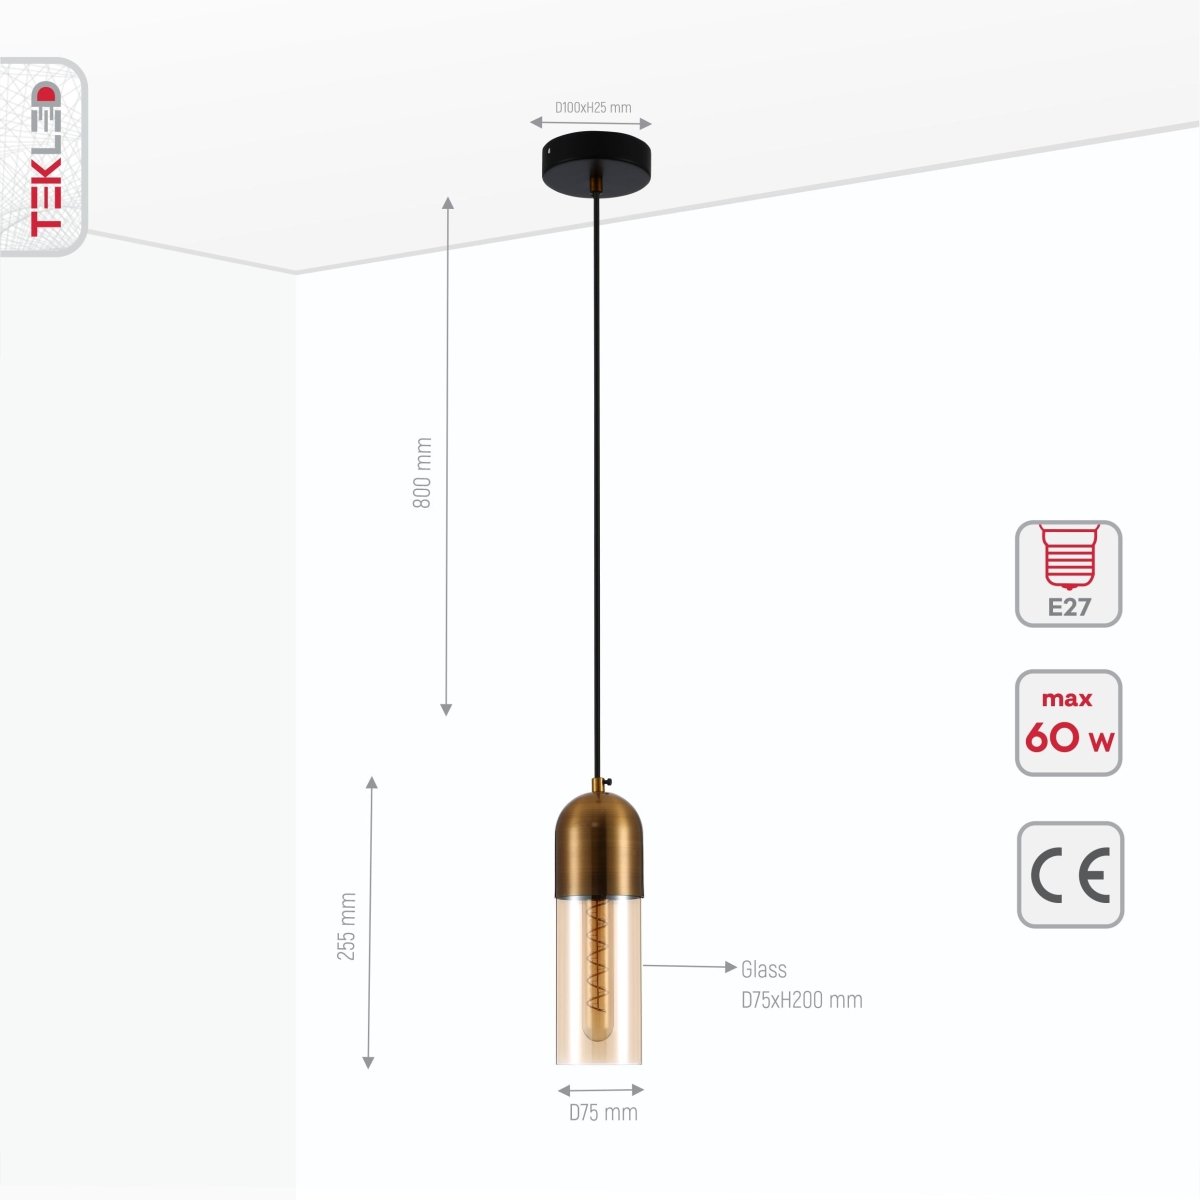 Product dimensions of amber glass gold aluminium bronze plated top cylinder pendant light e27